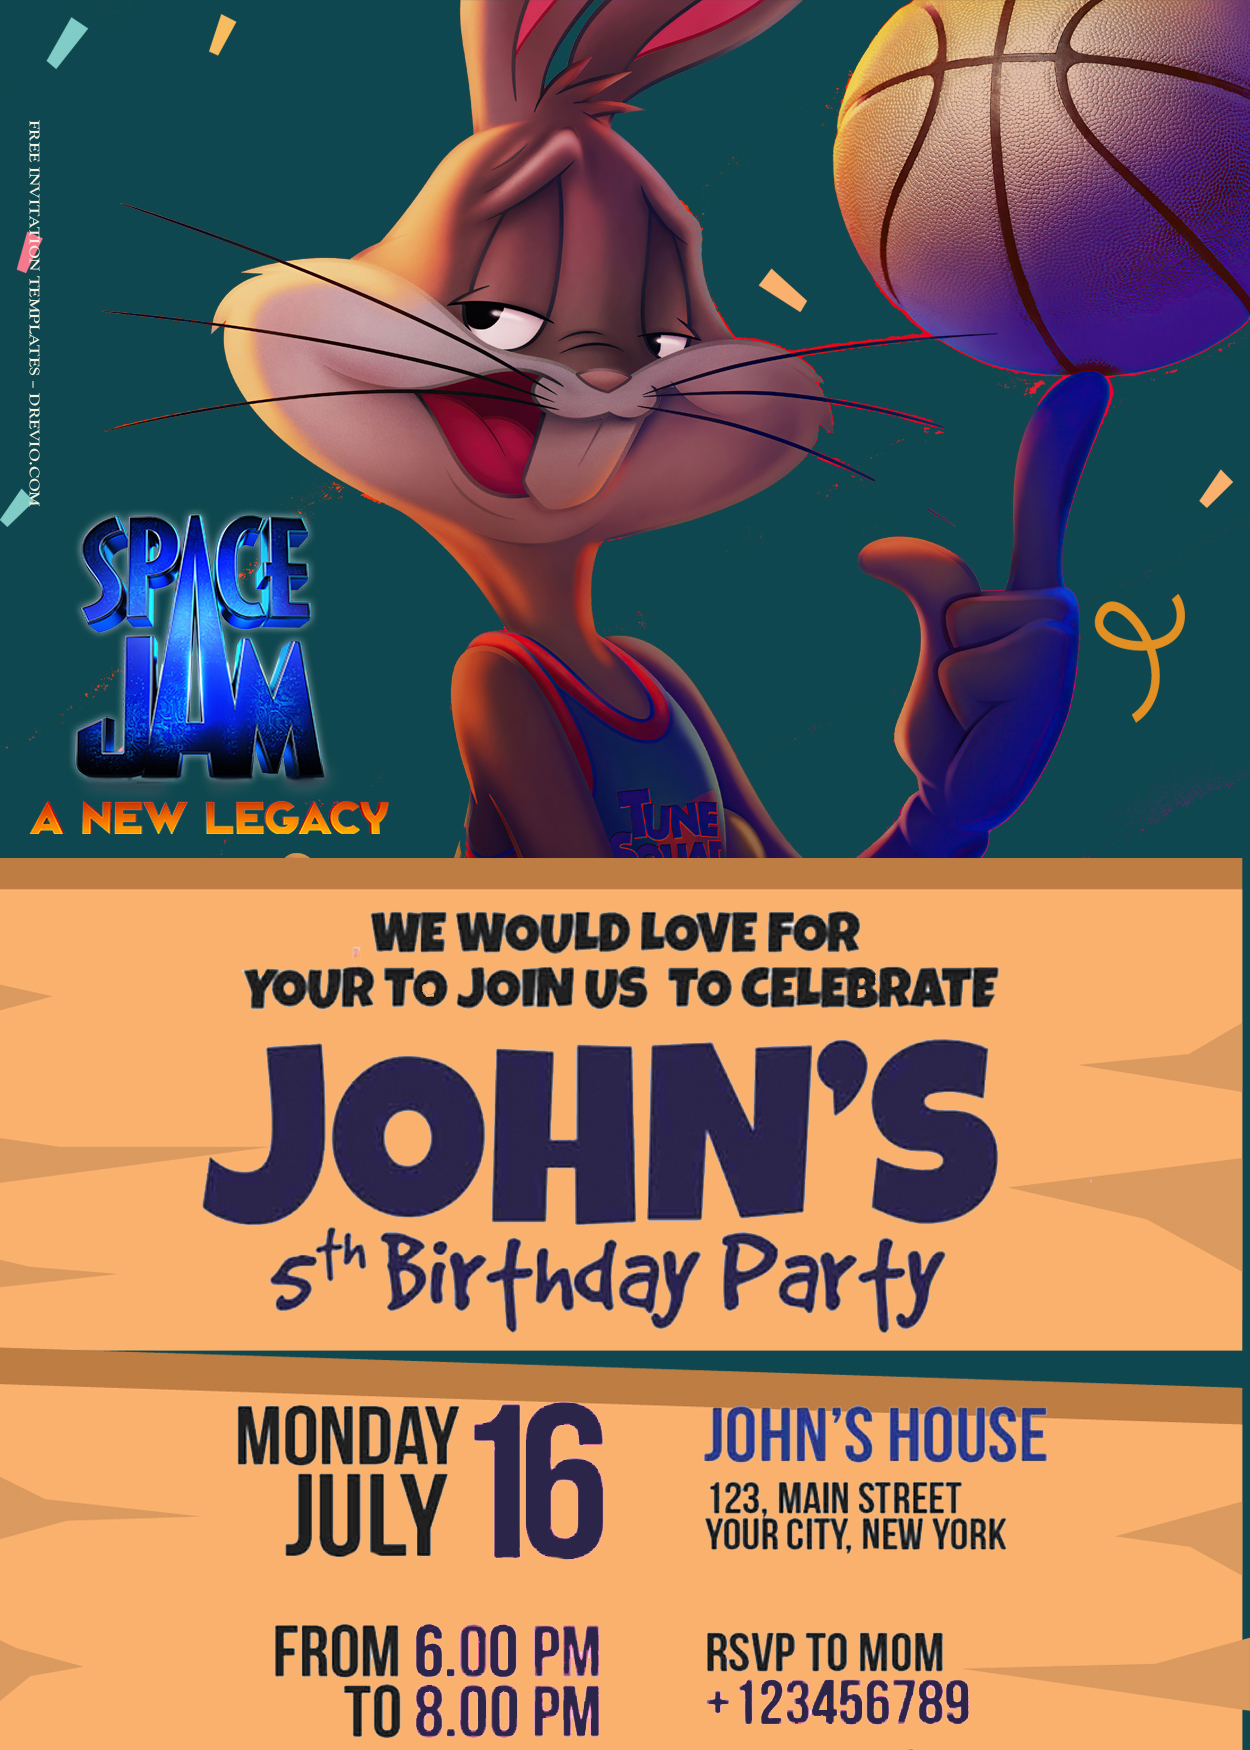 7+ Space Jam A New Legacy Birthday Invitation Templates Title